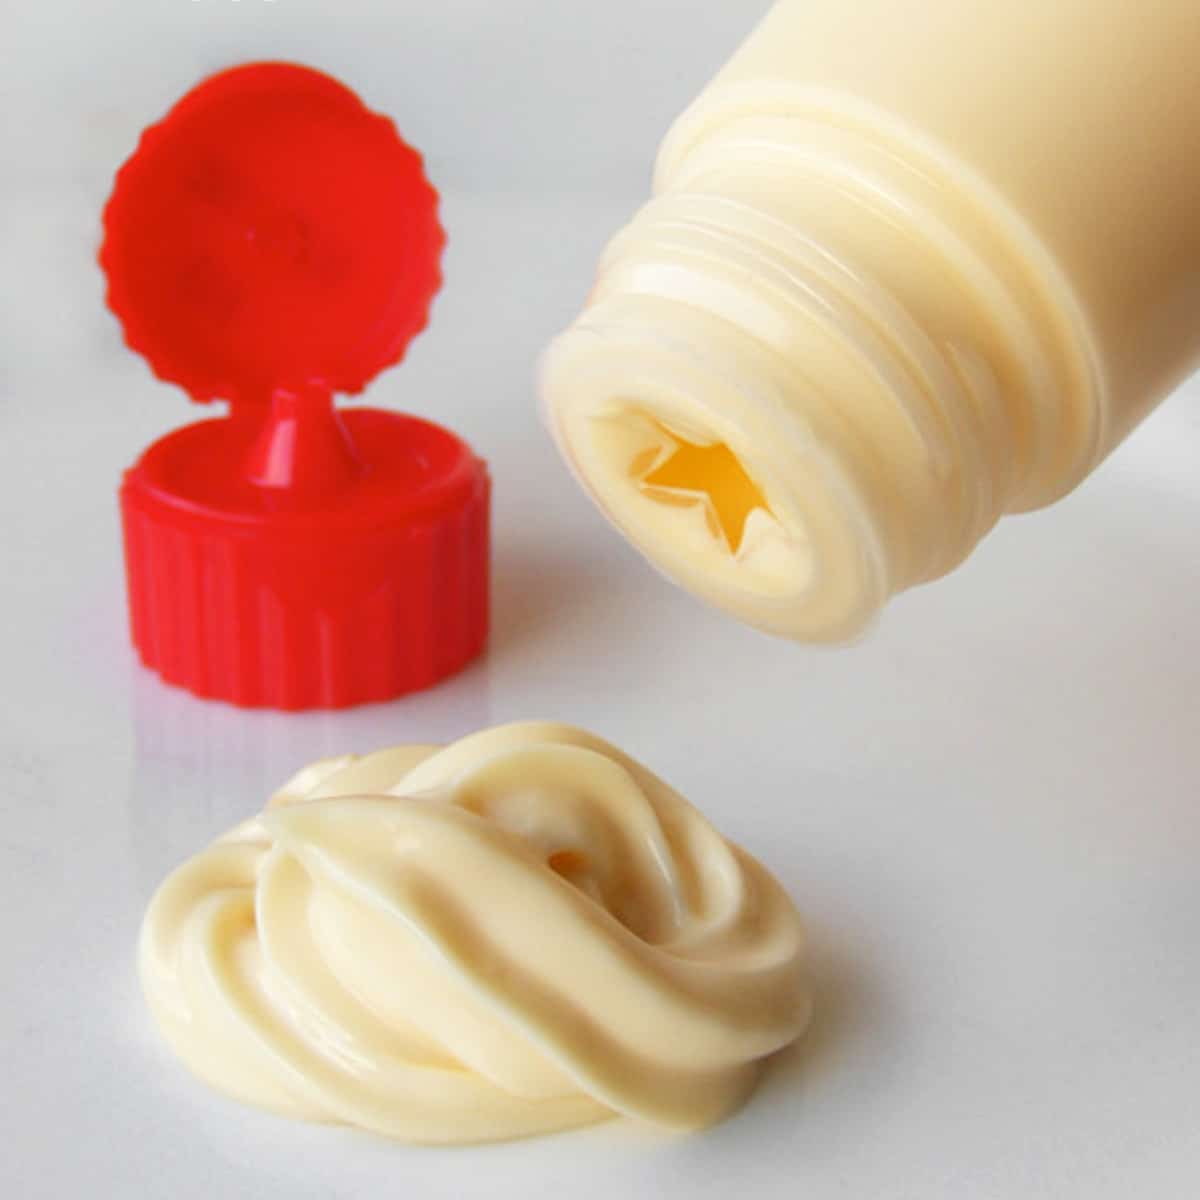 Keeping a bottle of Kewpie mayonnaise unopened for 12 months is possible if you follow a few simple guidelines. After opening, you have one month to use it up.